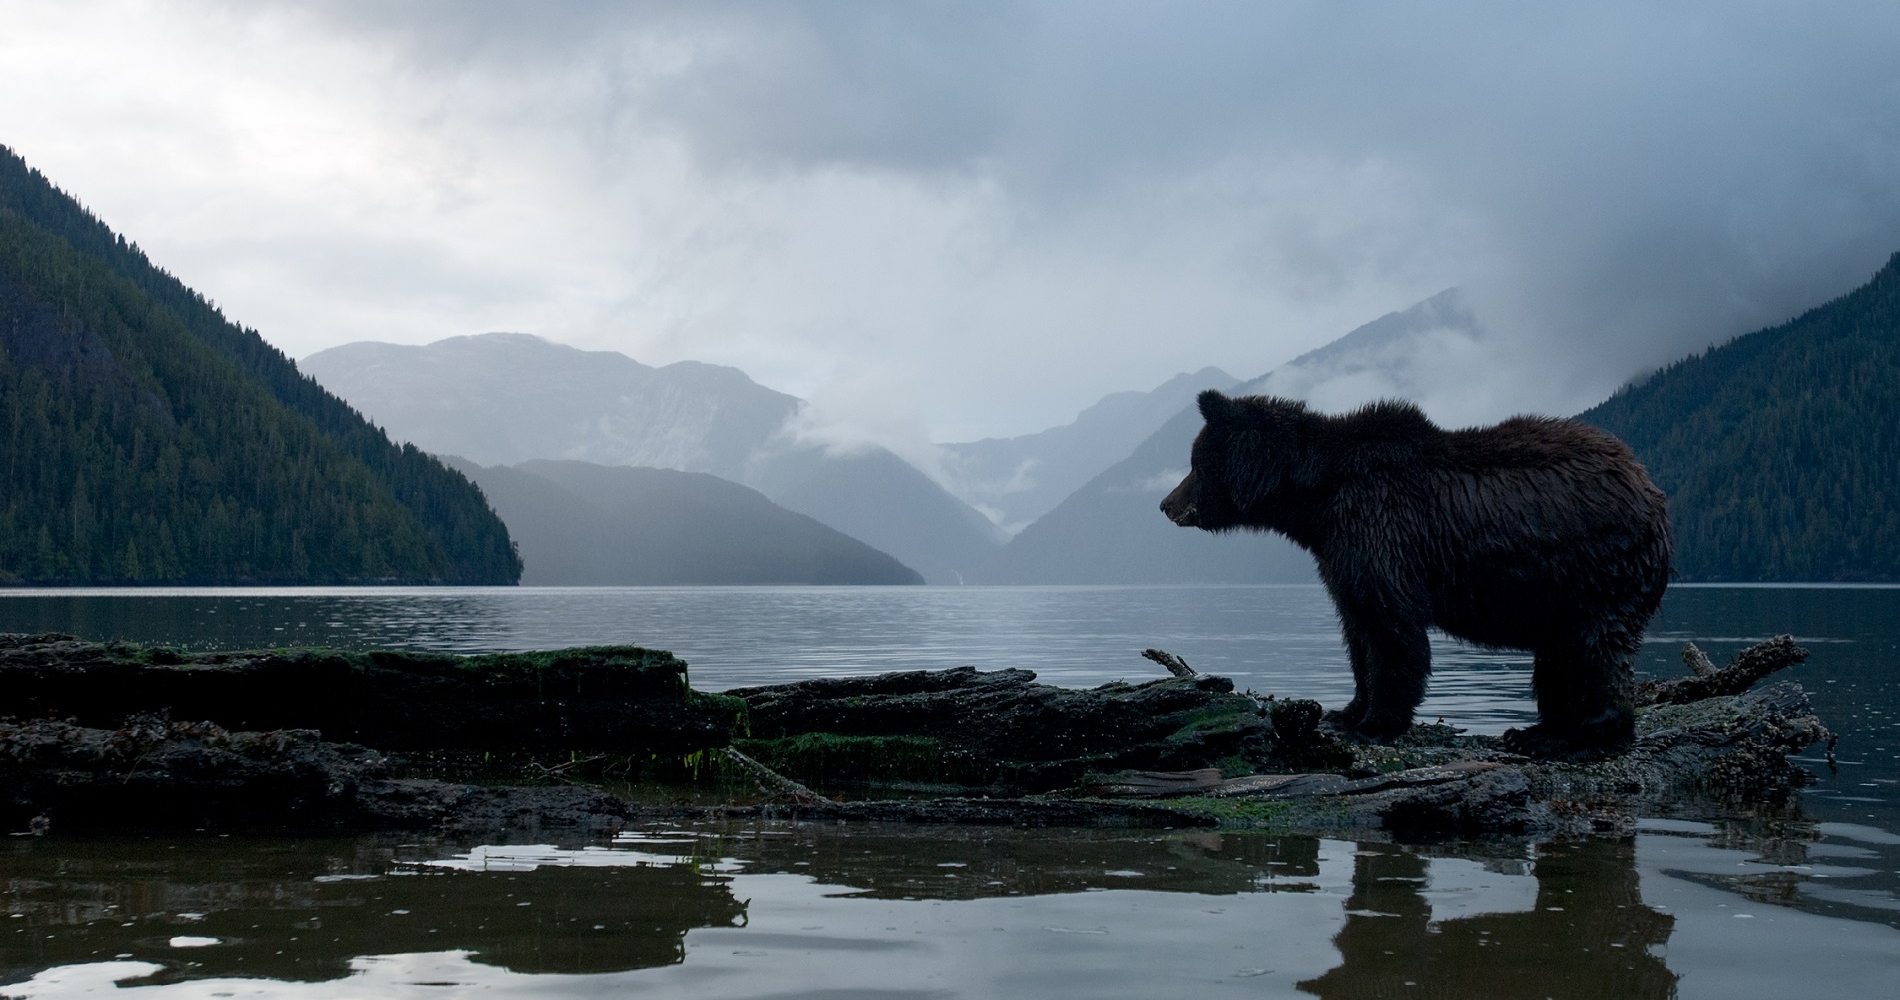 A grizzly bear stands on the shore